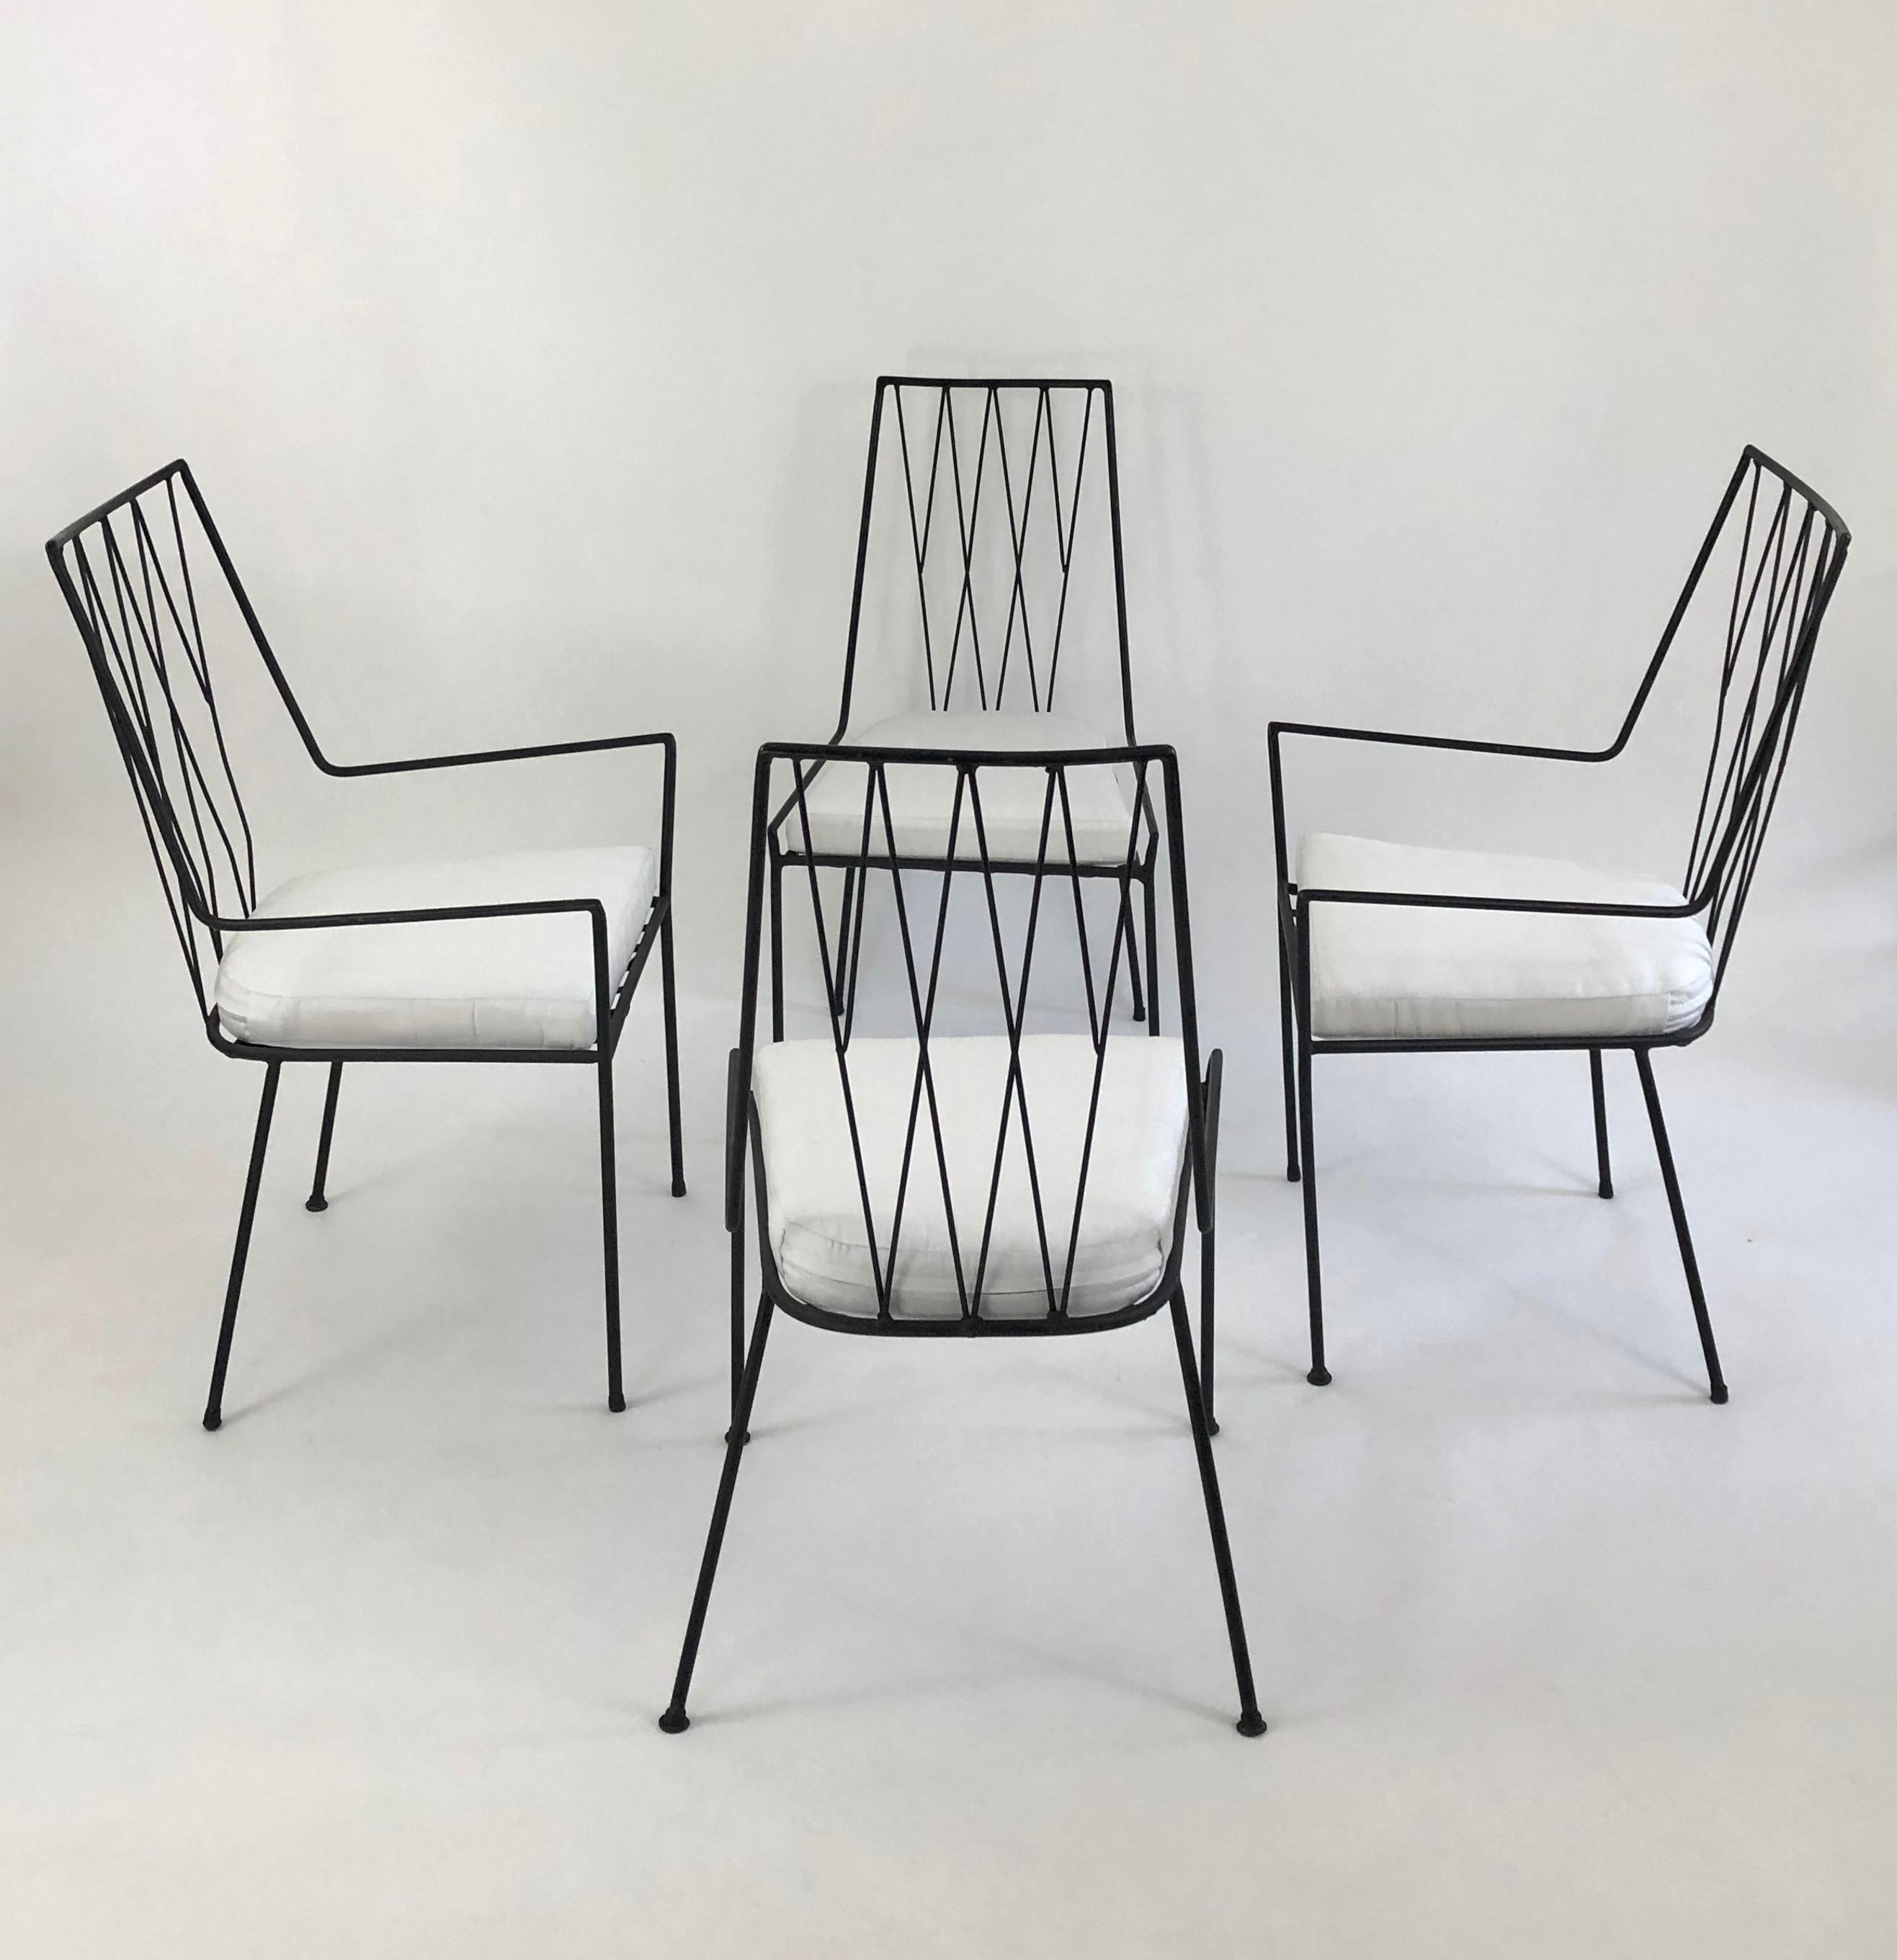 A Paul McCobb designed Pavilion Garden Furniture collection set of patio furniture, comprising a white milk glass table and four chairs in black wrought iron, with newly upholstered seat cushions in white Sunbrella with marine foam inserts. The set